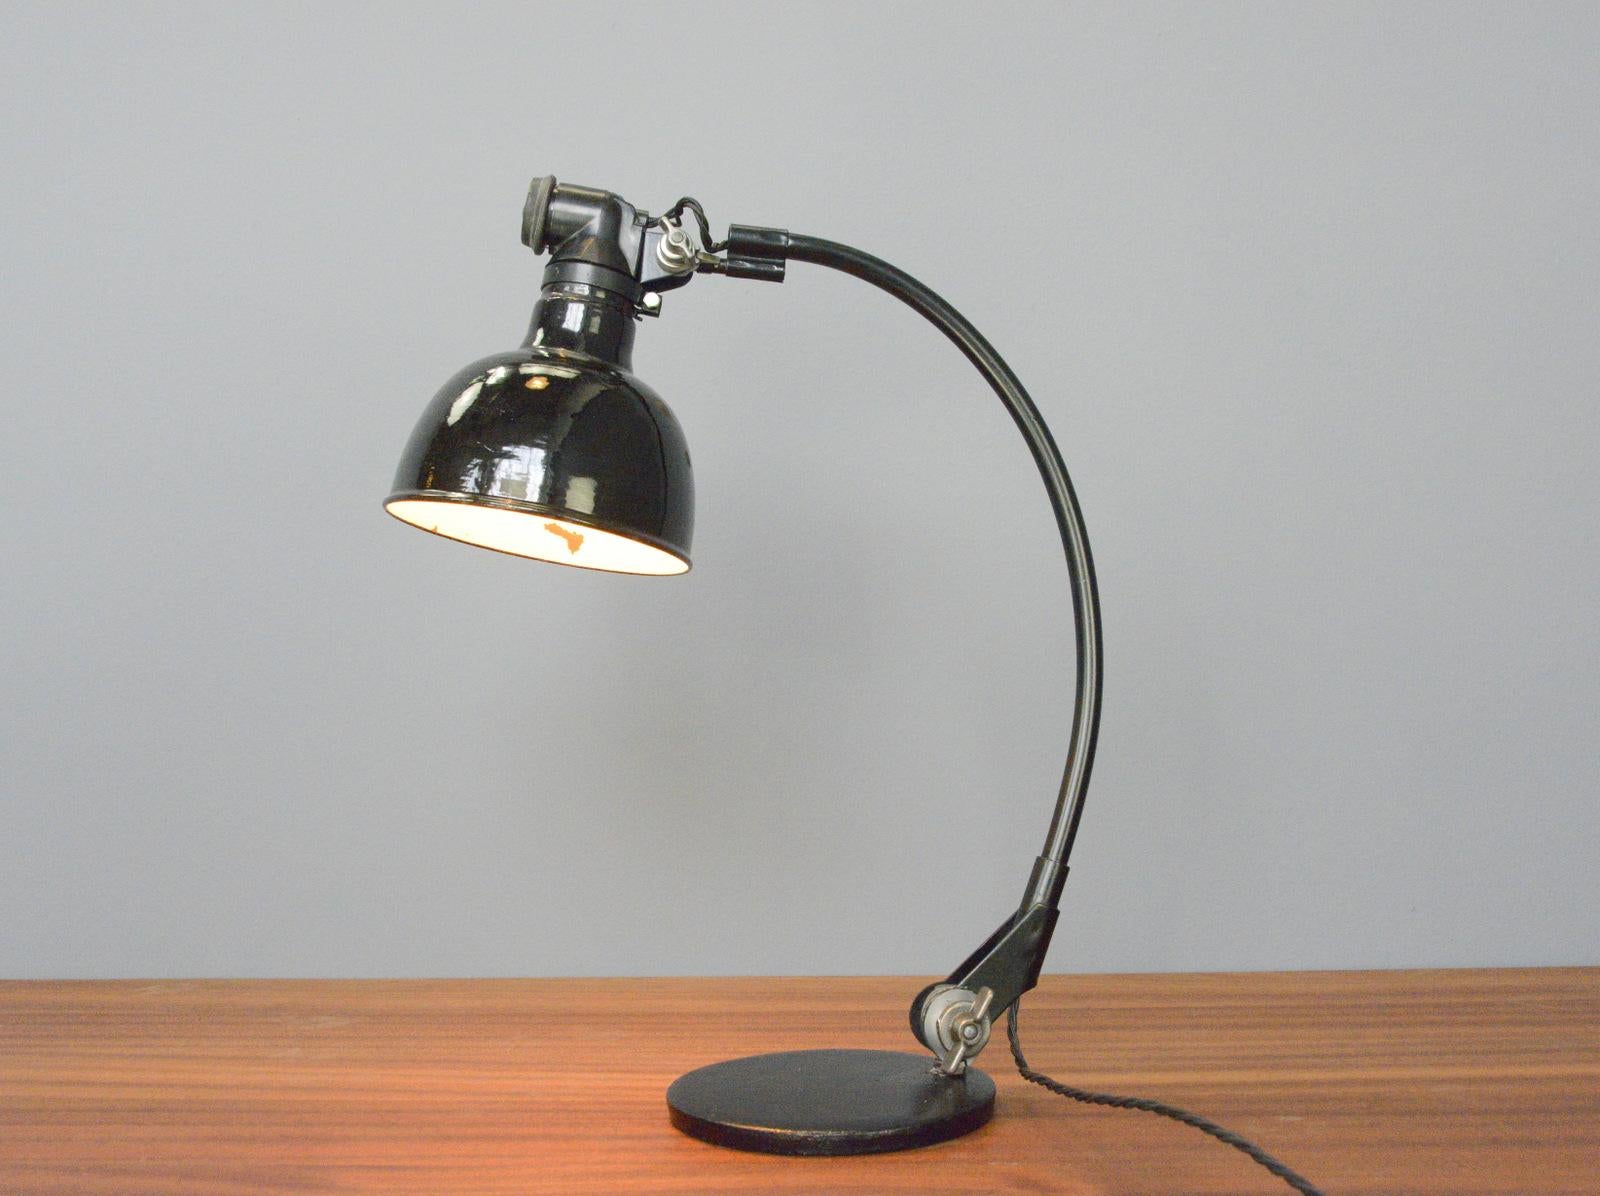 Rademacher table lamp, Circa 1920s.

- Vitreous black enamel shade
- Articulated curved arm
- Cast iron base
- Made by Ernst Rademacher, Dusseldorf
- German ~ 1920s
- 50cm tall x 40cm deep x 16cm wide

Rademacher

Founded as a company in